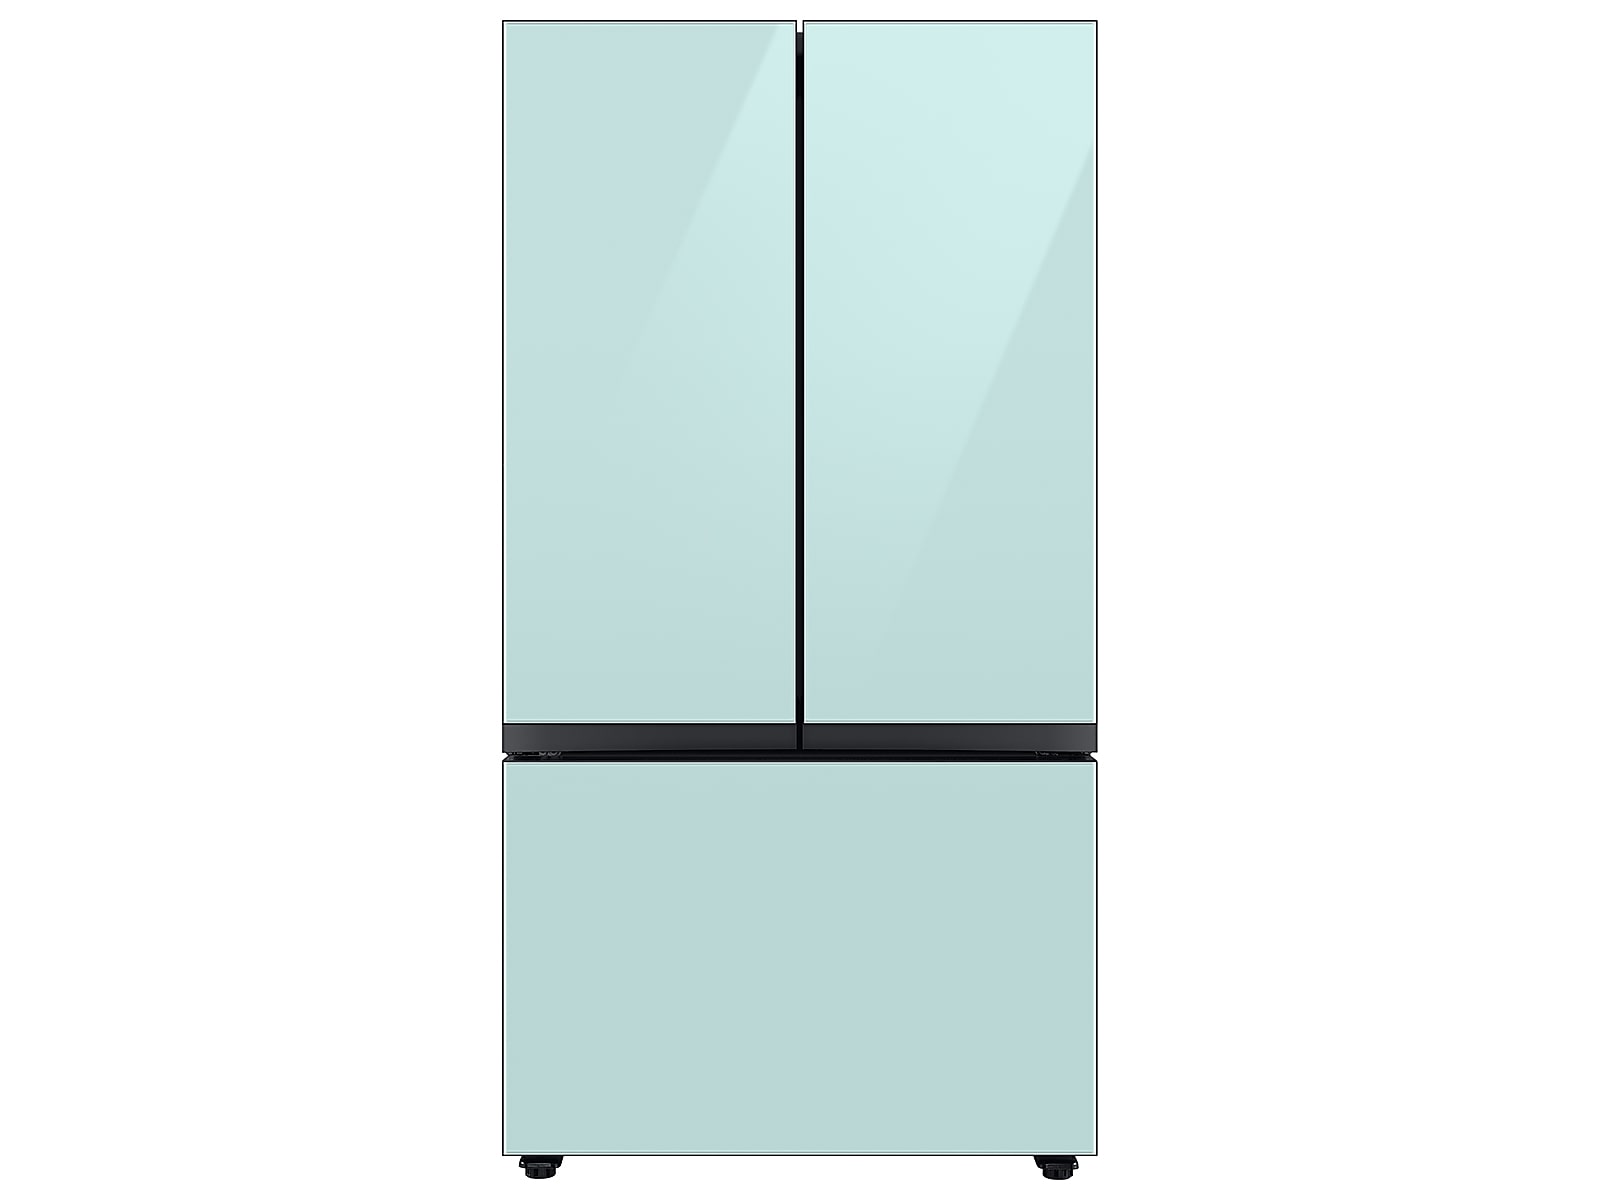 Samsung Bespoke 3-Door French Door Refrigerator in Stainless Steel (30 cu. ft.) with Beverage Center™ in Morning Blue Glass(BNDL-1650312326422) photo